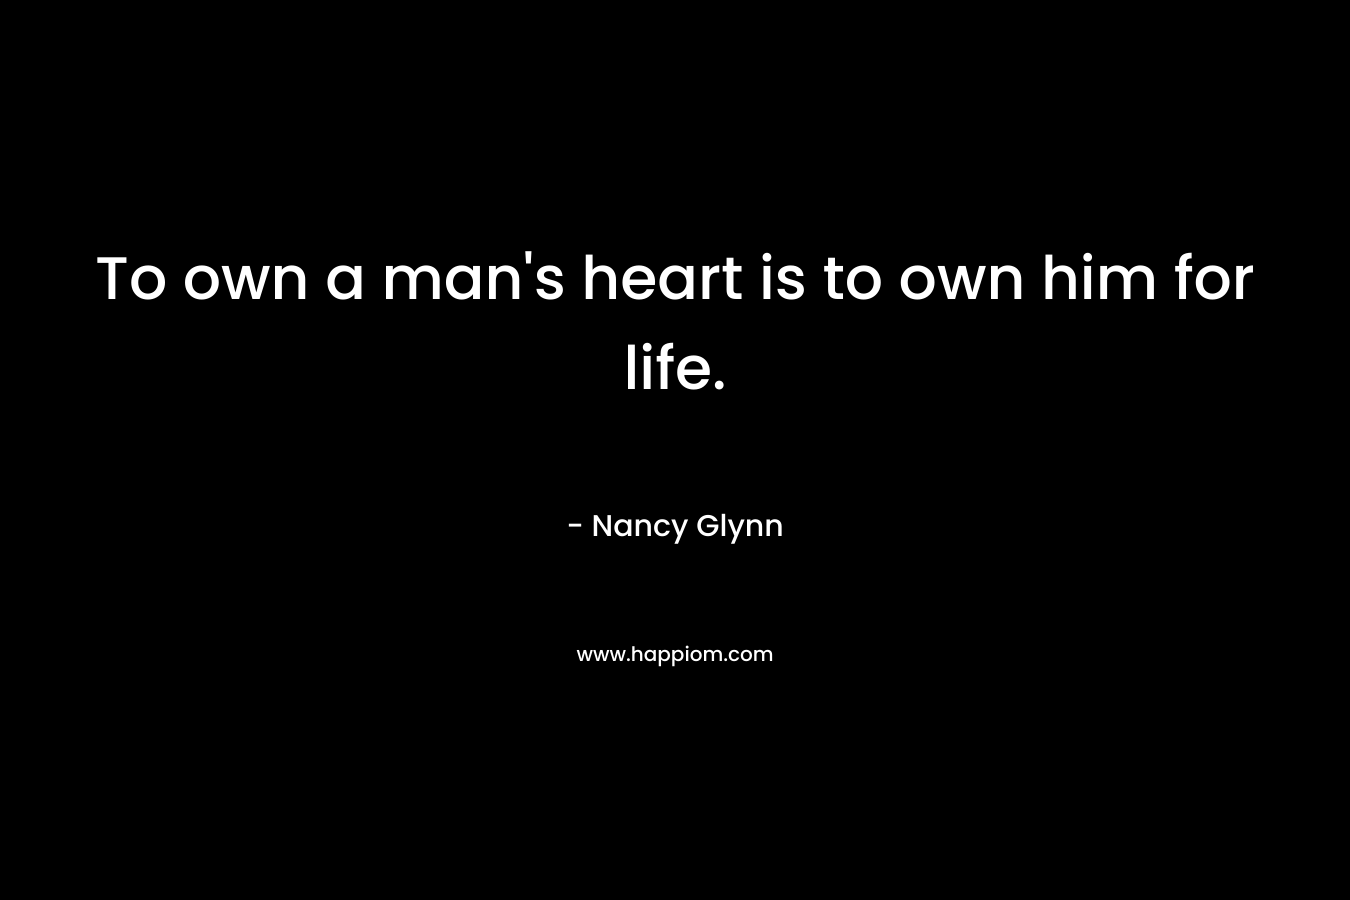 To own a man’s heart is to own him for life. – Nancy Glynn